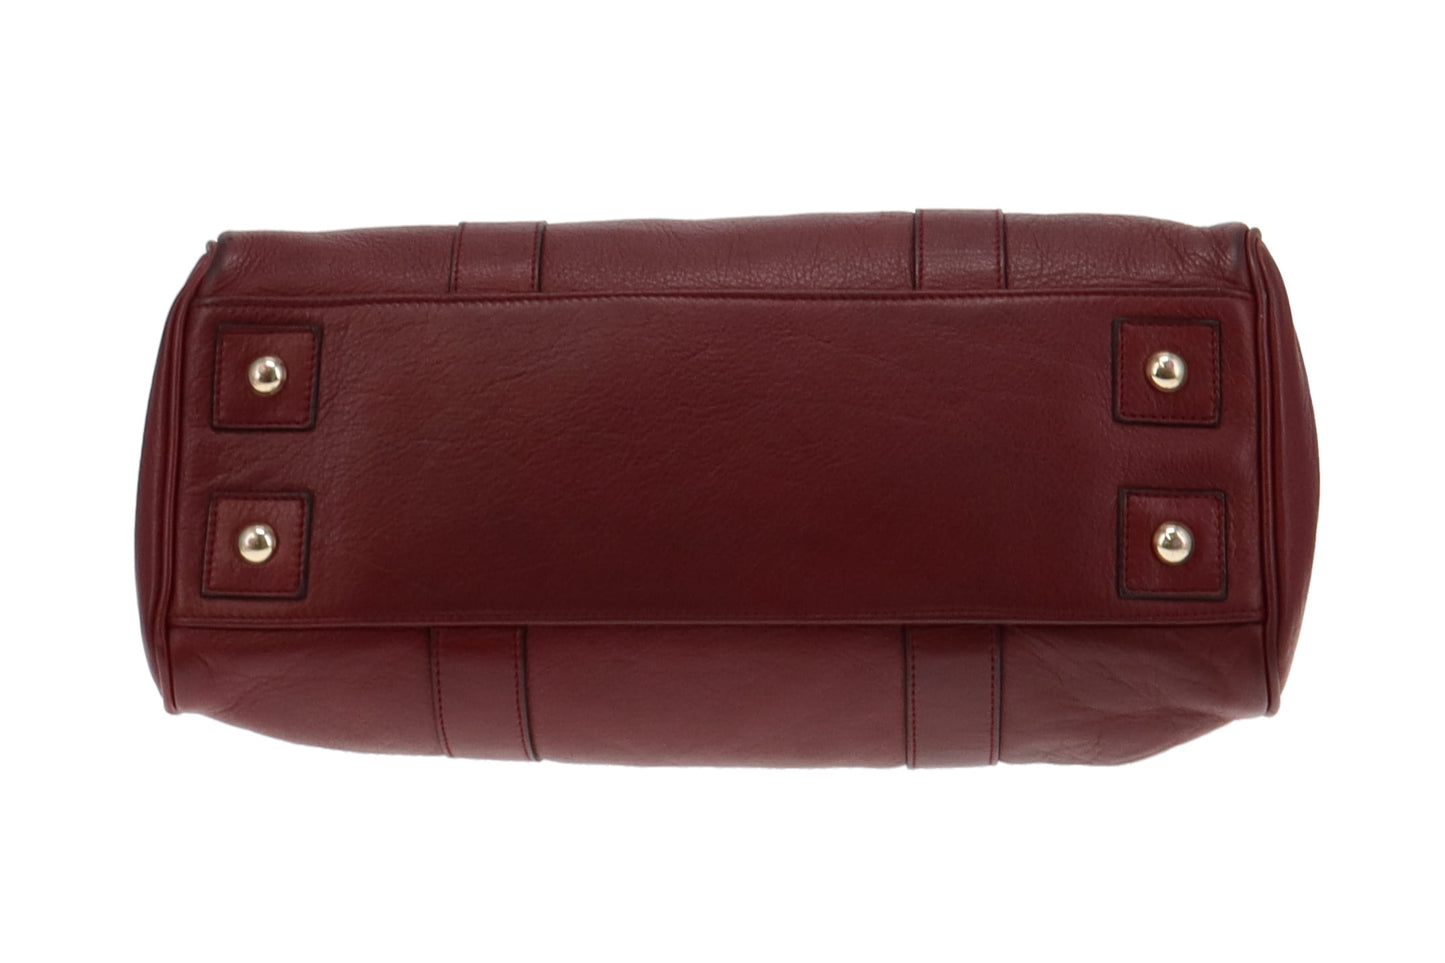 Mulberry Classic Bayswater in Wine Leather